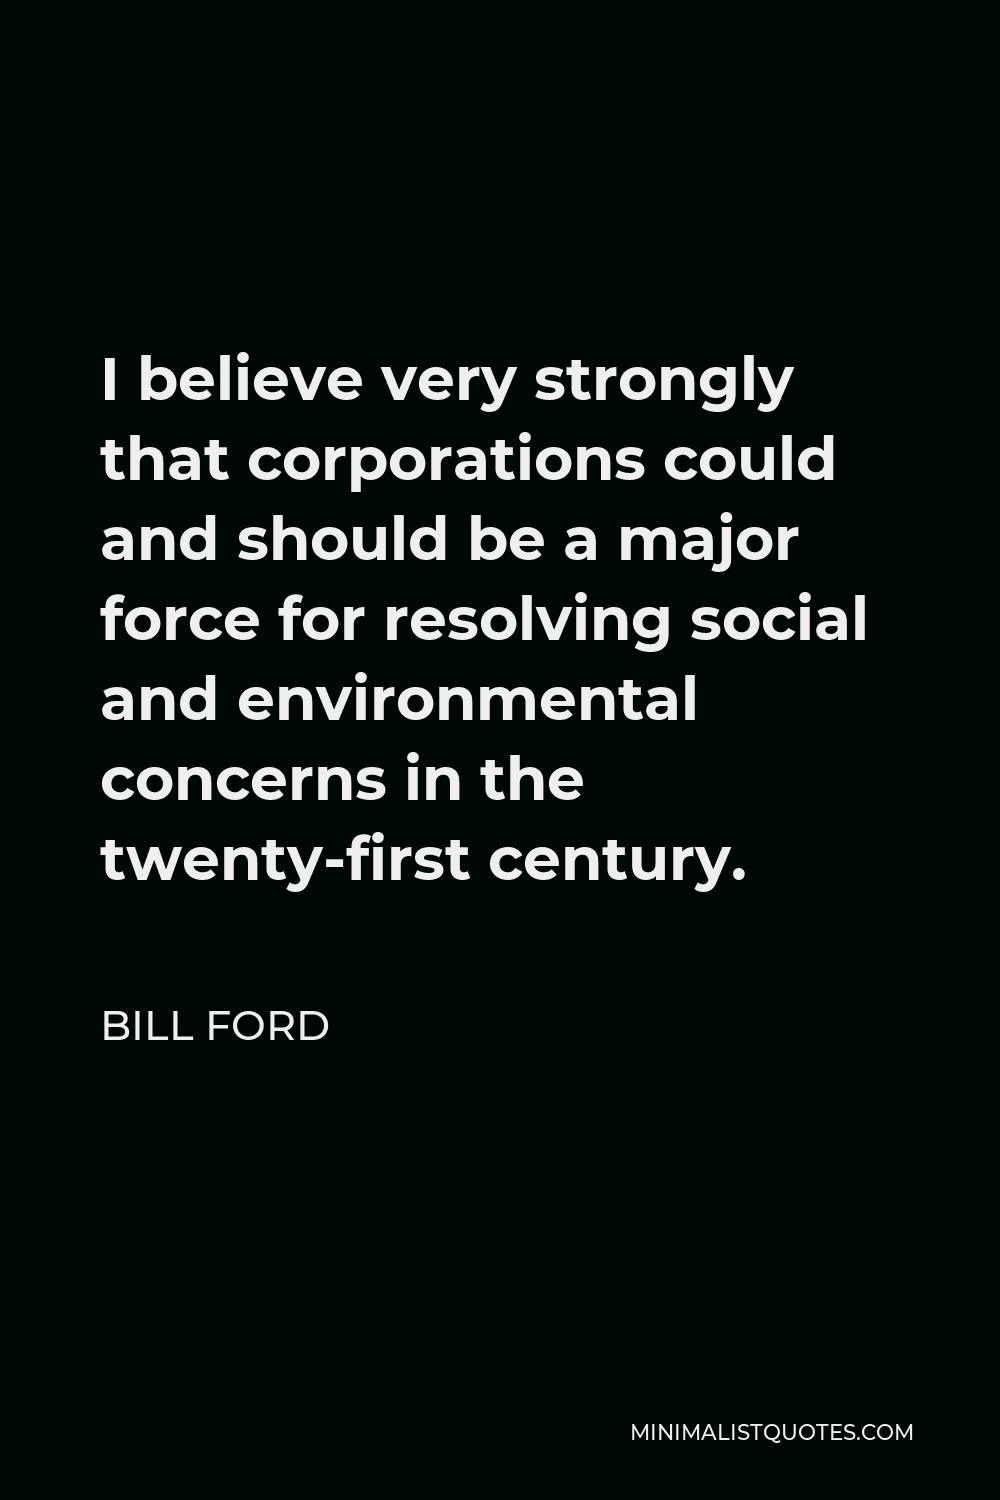 Bill Ford Quote - I believe very strongly that corporations could and should be a major force for resolving social and environmental concerns in the twenty-first century.